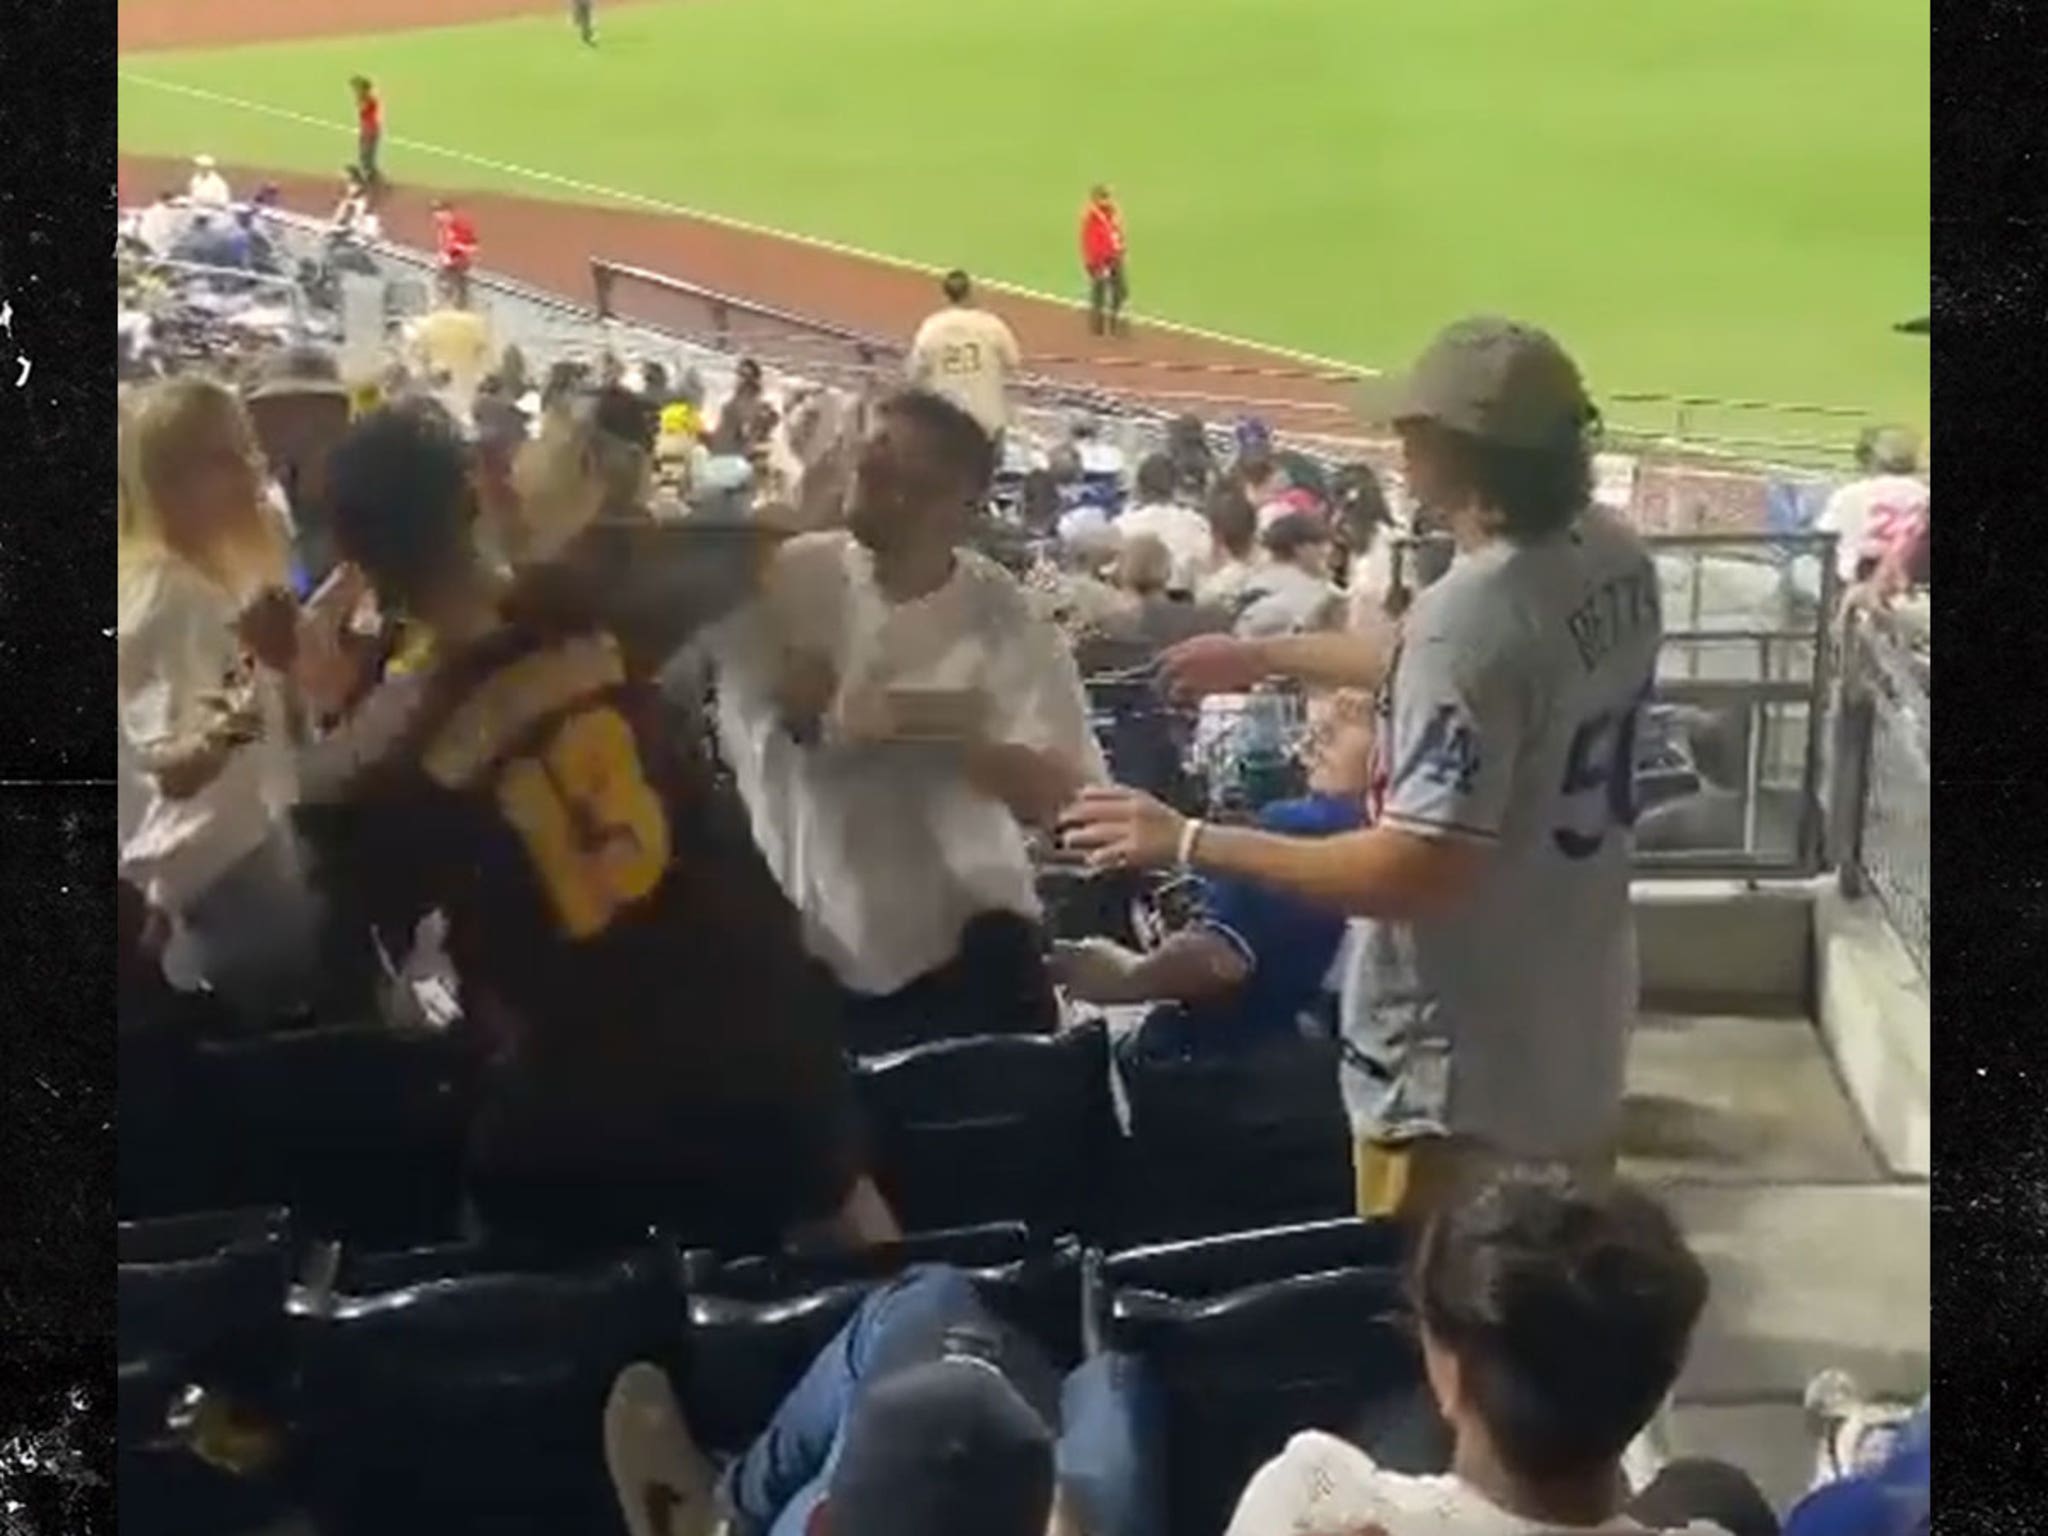 Dodgers Fan Socked In Face In Insane Fistfight At Padres Game